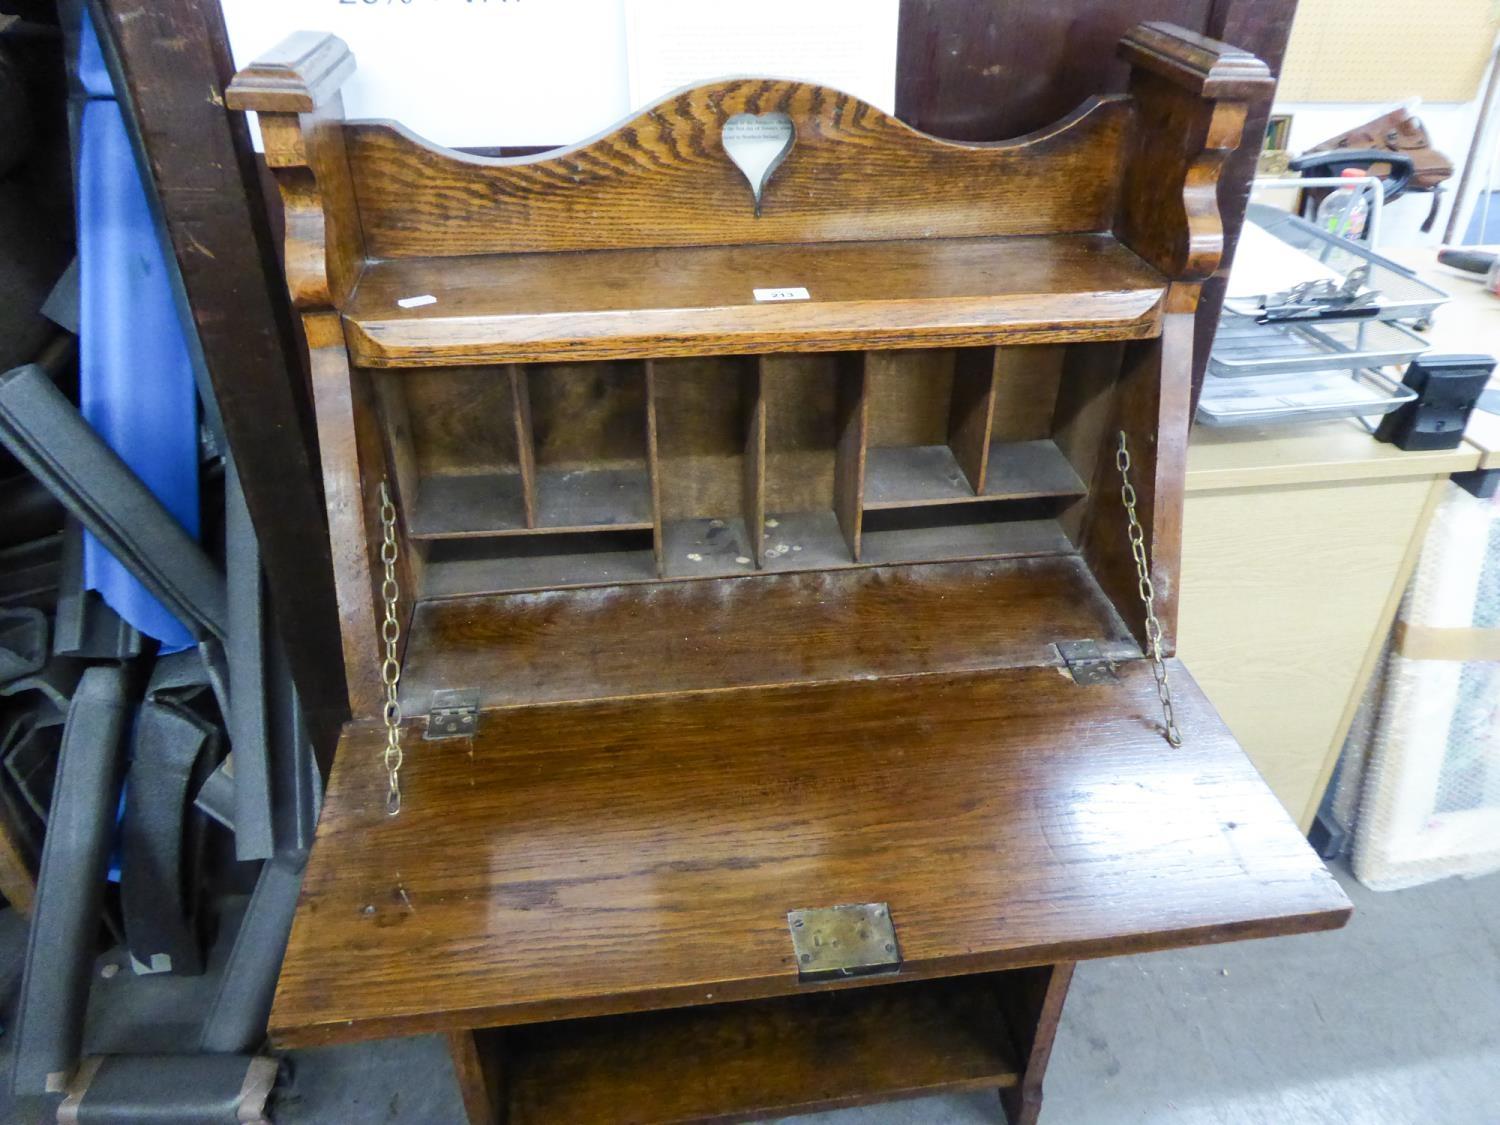 AN EDWARDIAN ARTS AND CRAFTS INLAID OAK BUREAU, WITH TWO OPEN SHELVES BELOW - Image 2 of 2